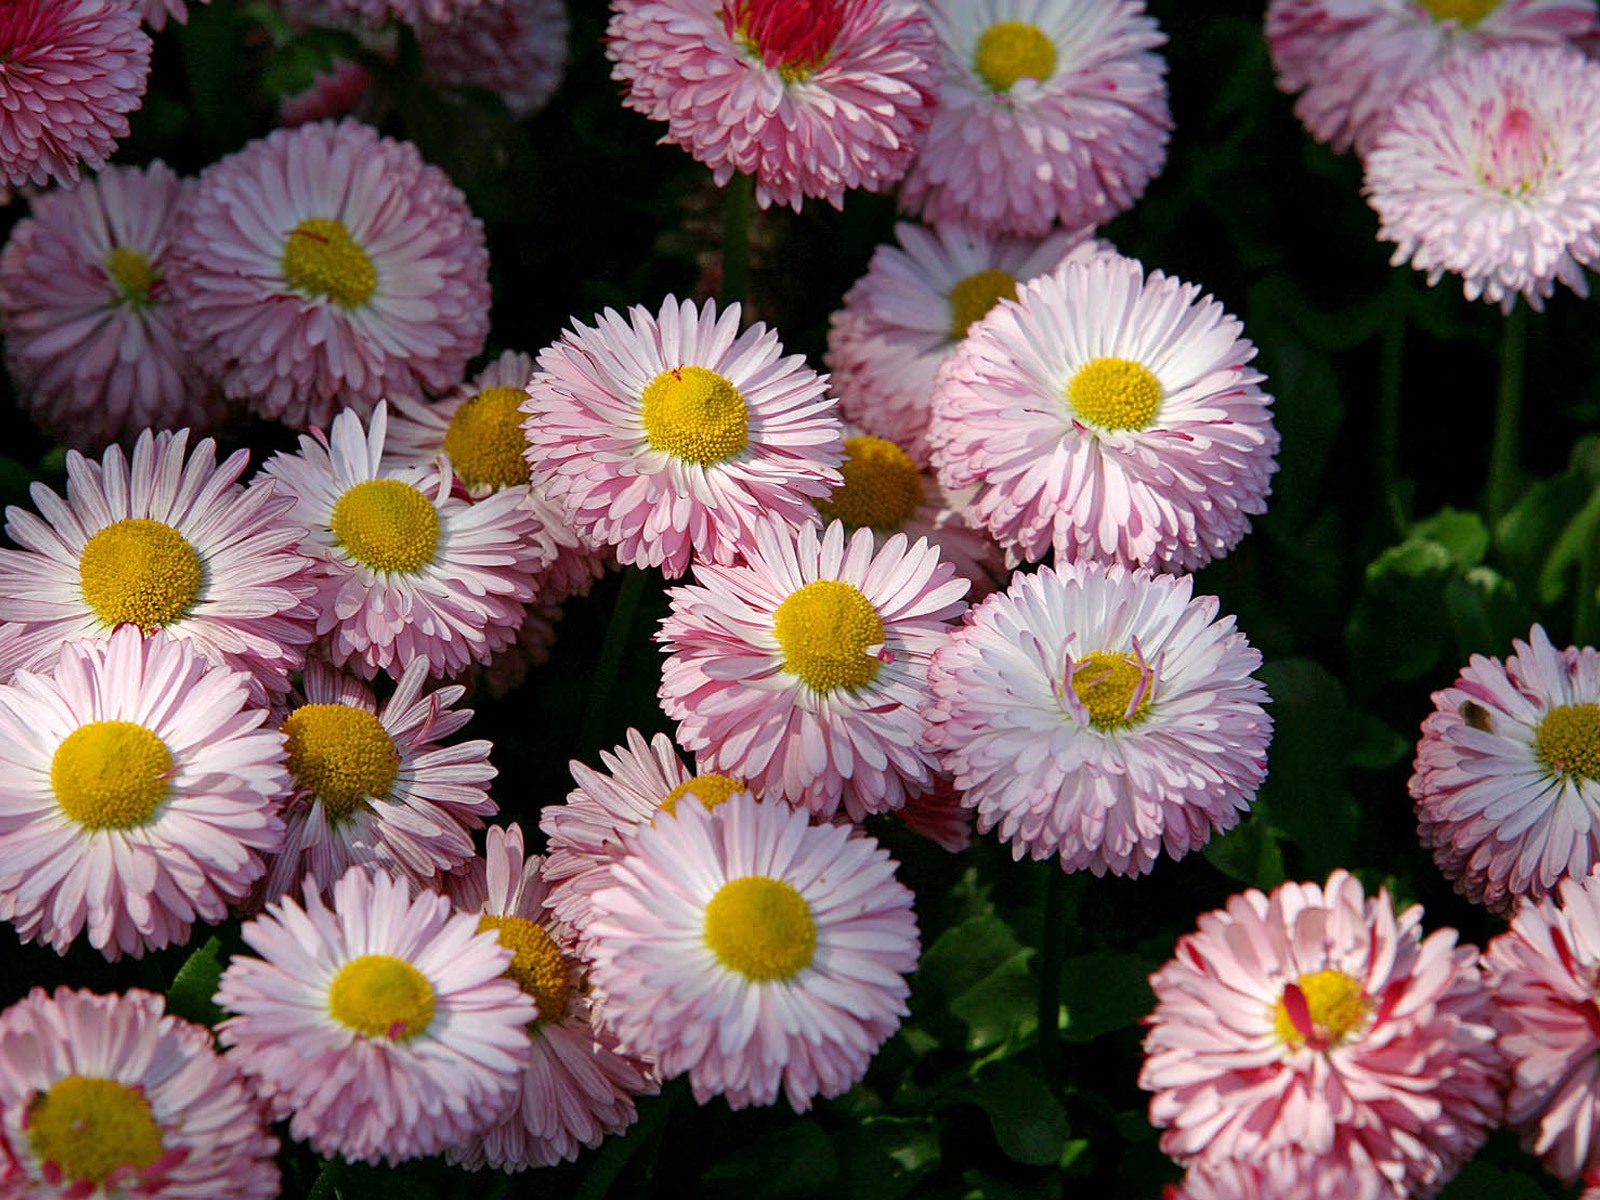 Daisies flowers close-up HD wallpapers #15 - 1600x1200